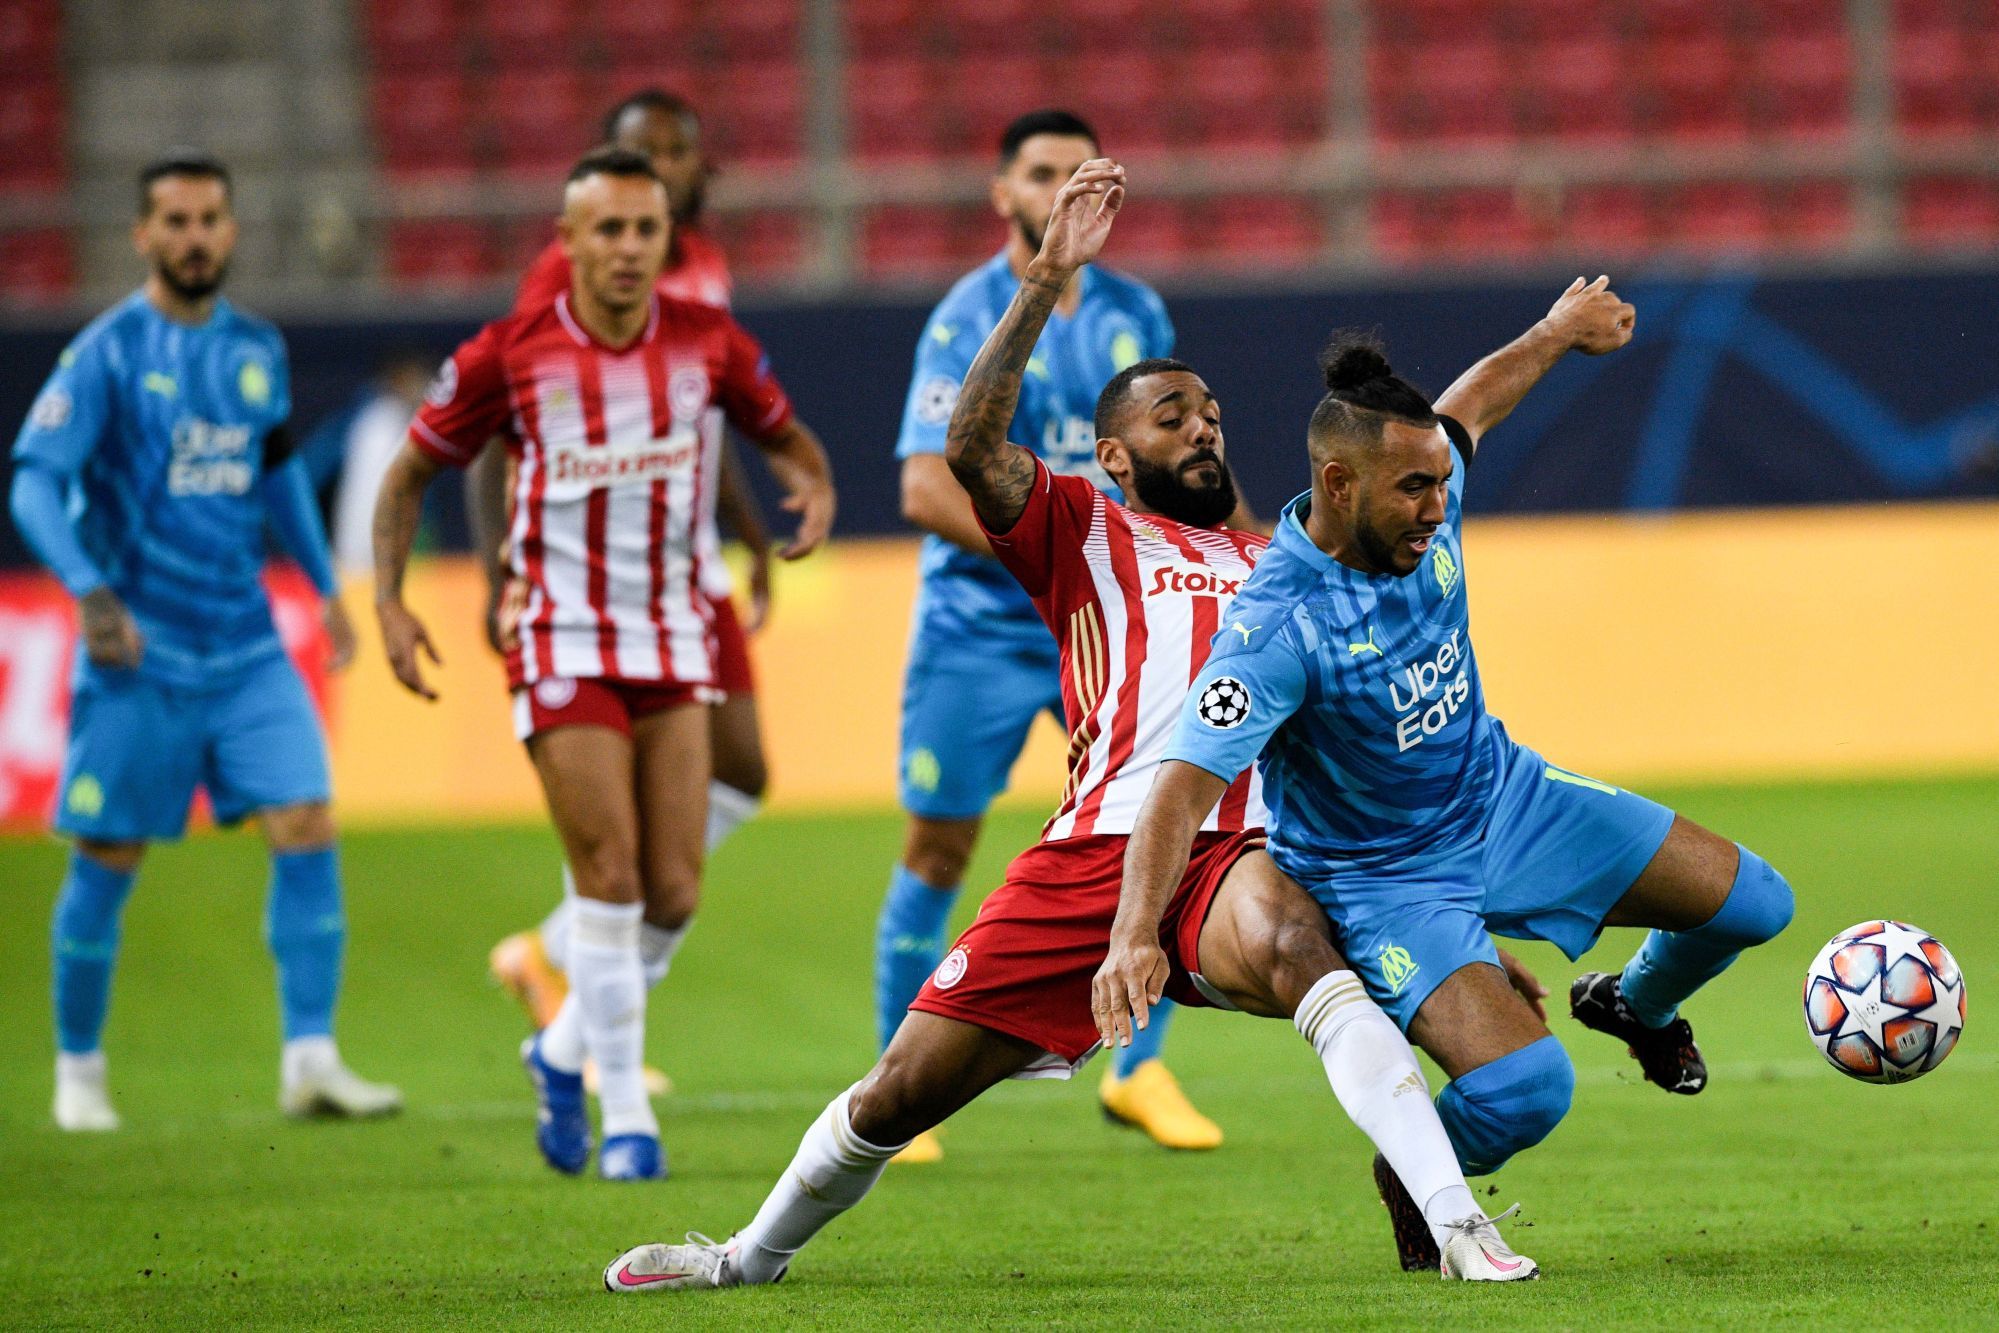 Yann MVilla of Olympiacos and Dimitri Payet of Marseille during the UEFA Champions League match between Olympiacos and Marseille, at Georgios Karaiskakis on October 21, 2020 in Athens, Greece. Photo by Icon Sport - Georgios Karaiskakis - Pirée (Grece)